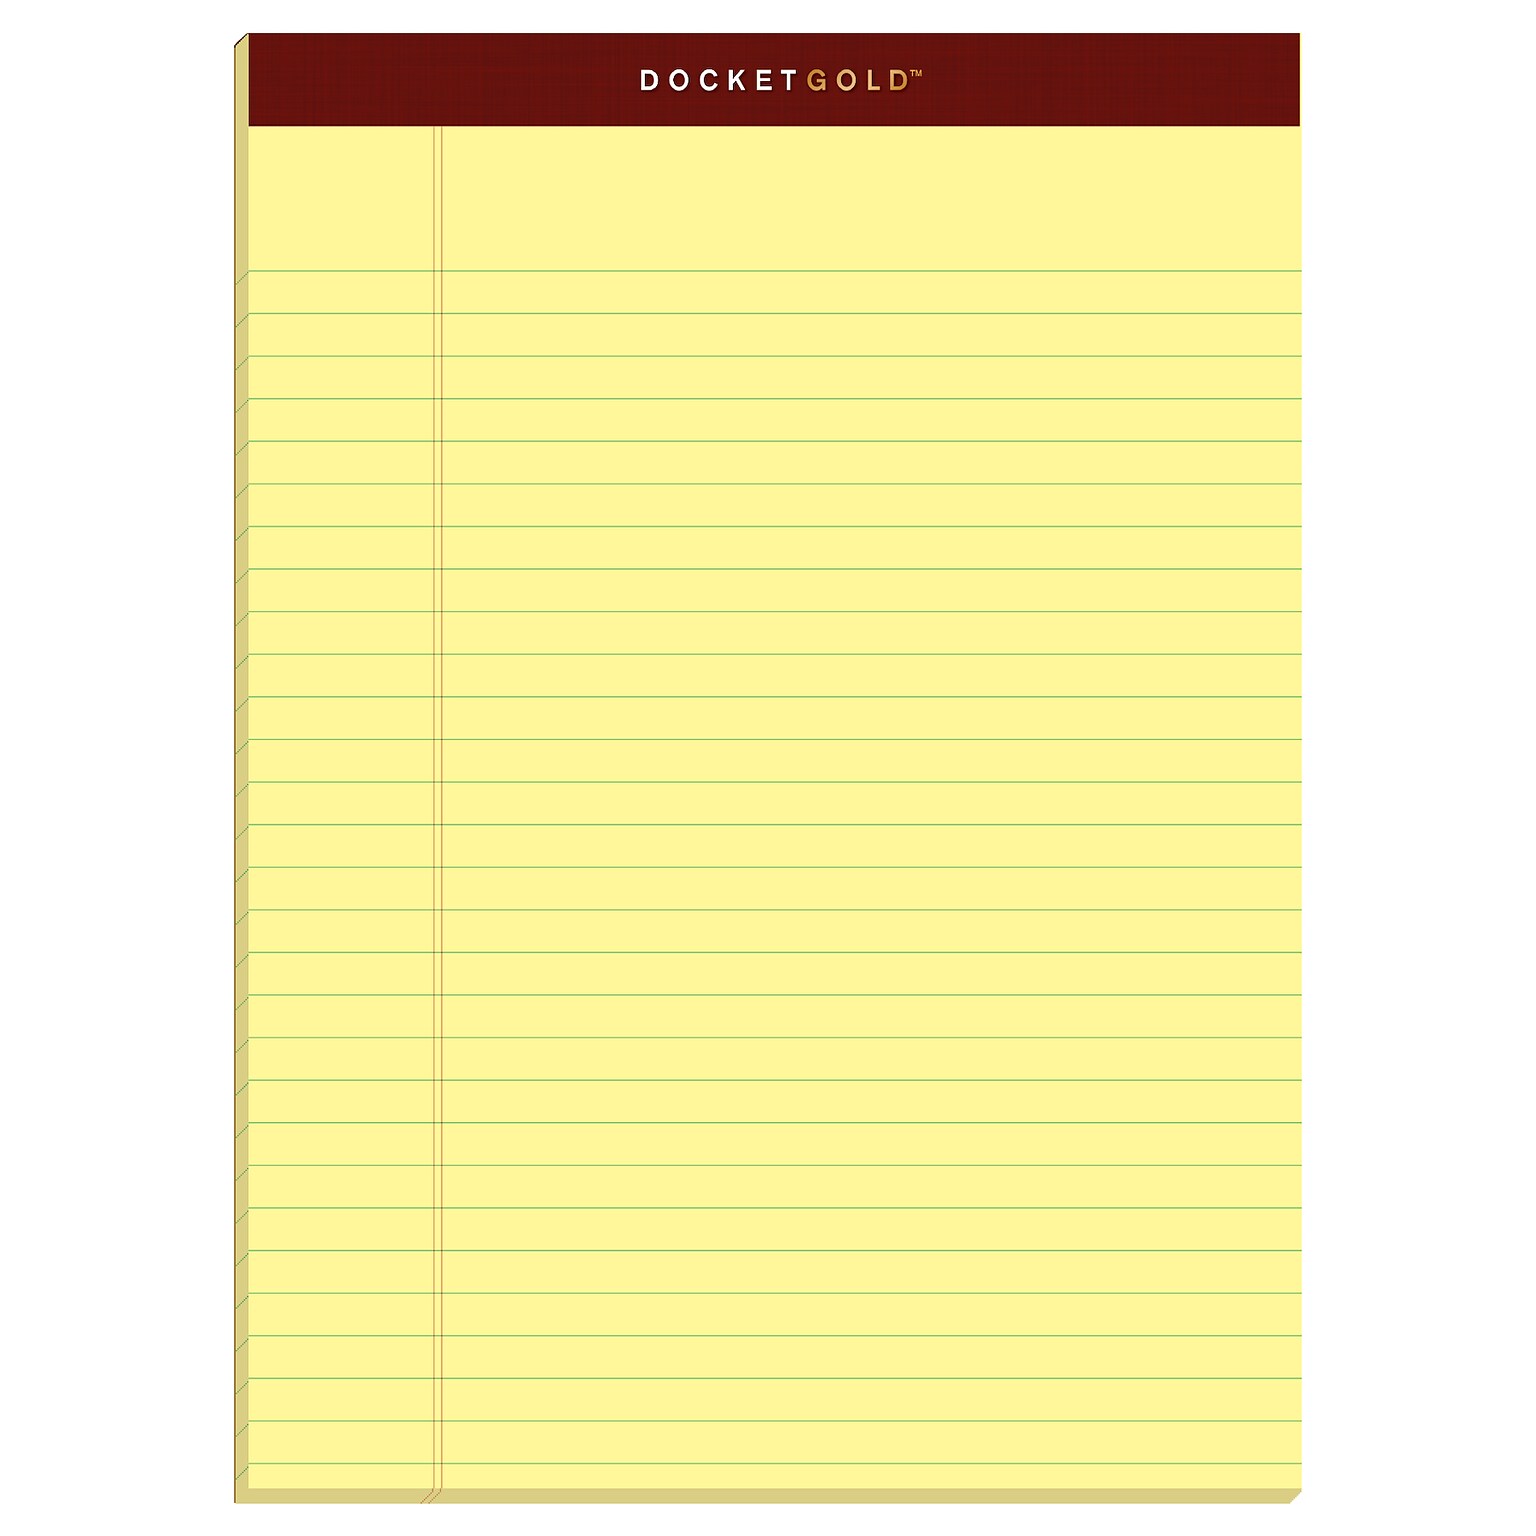 Tops Docket Gold Notepads, 8.5 x 11.75, Canary, 50 Sheets/Pad, 12 Pads/Pack (63950)